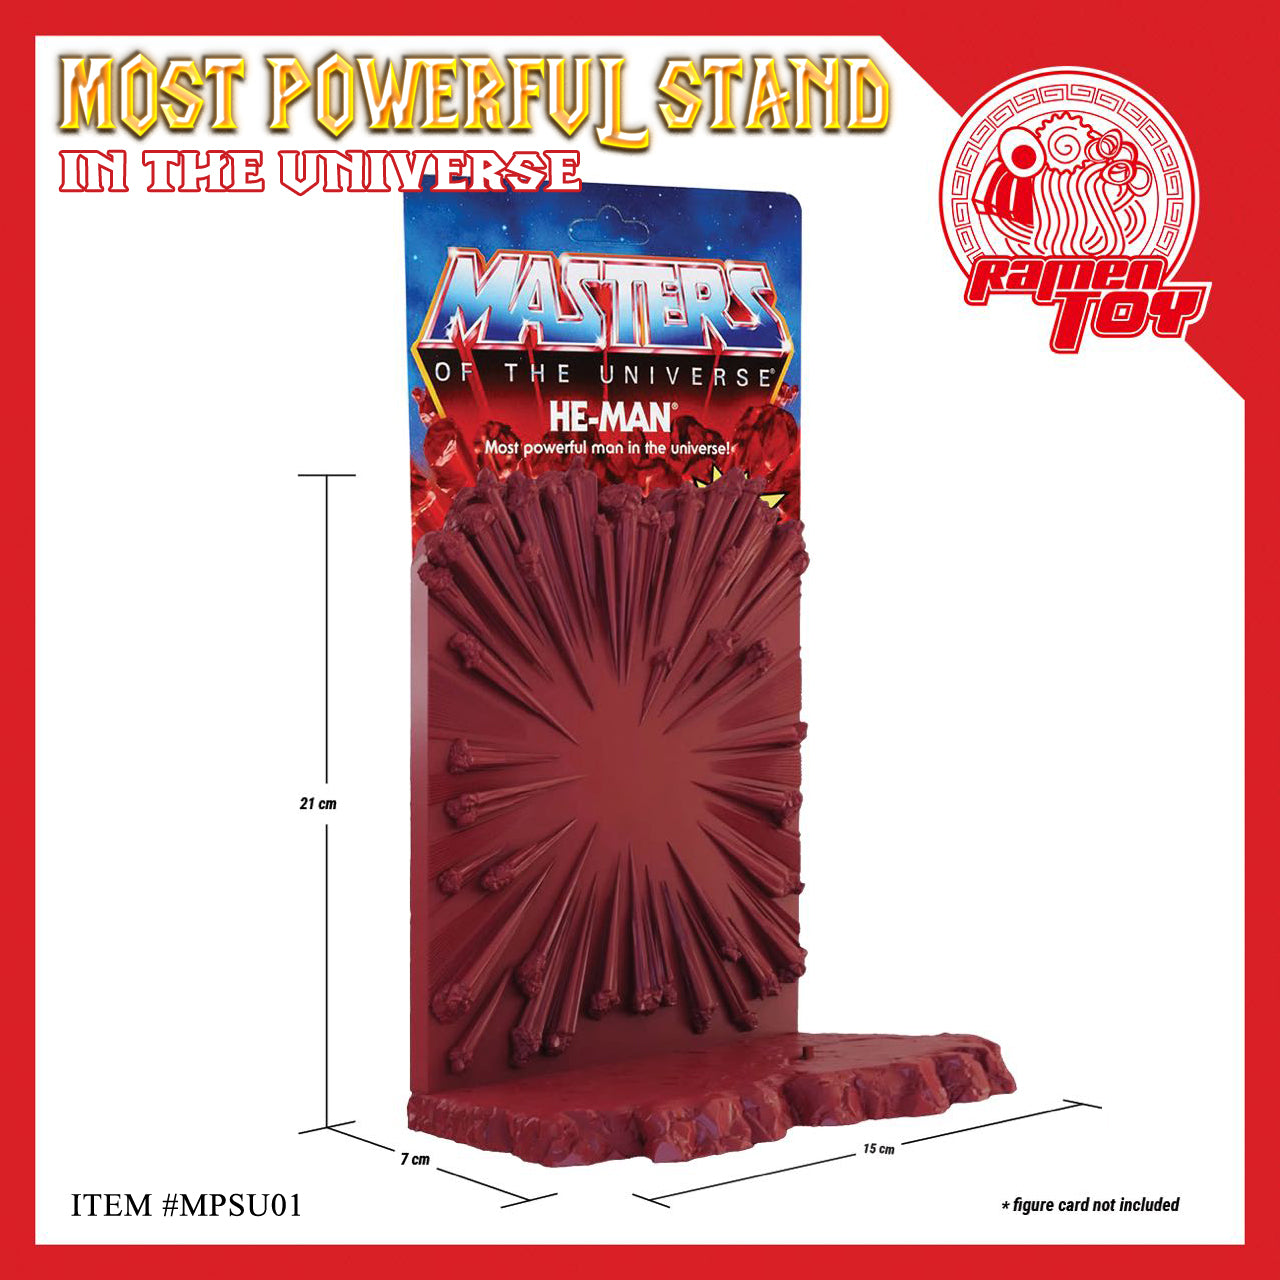 ITEM #MPSU01 - The Most Powerful Stand in the Universe (PRE-ORDER) Exclude Shipping